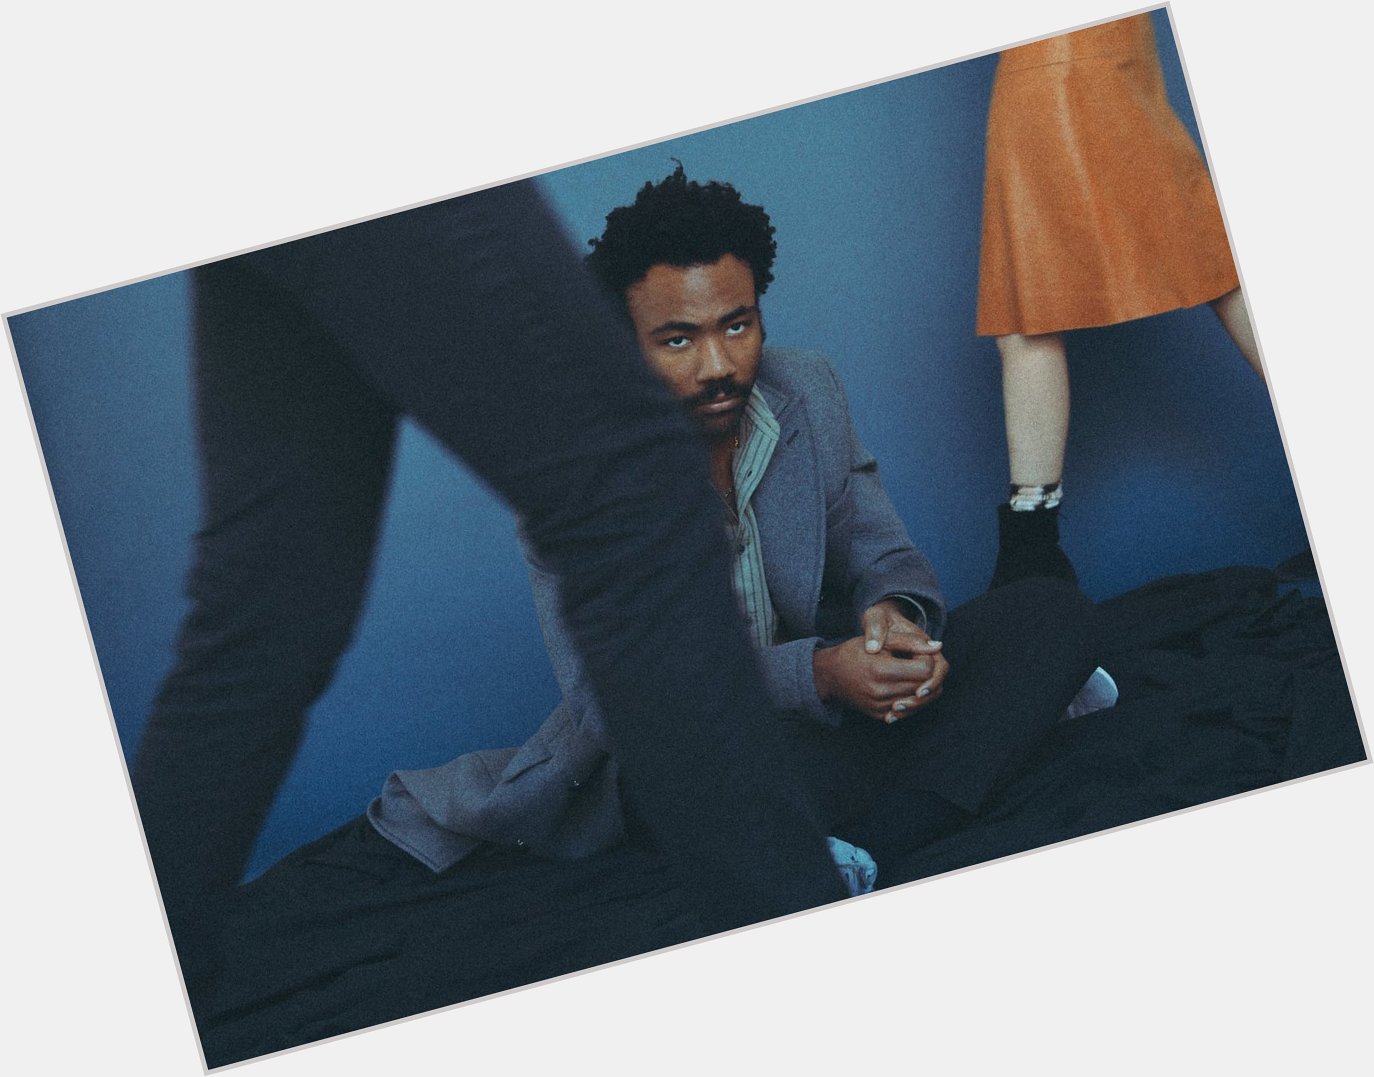 The king of the multi-hyphen career turns 37 today! Happy Birthday Donald Glover 